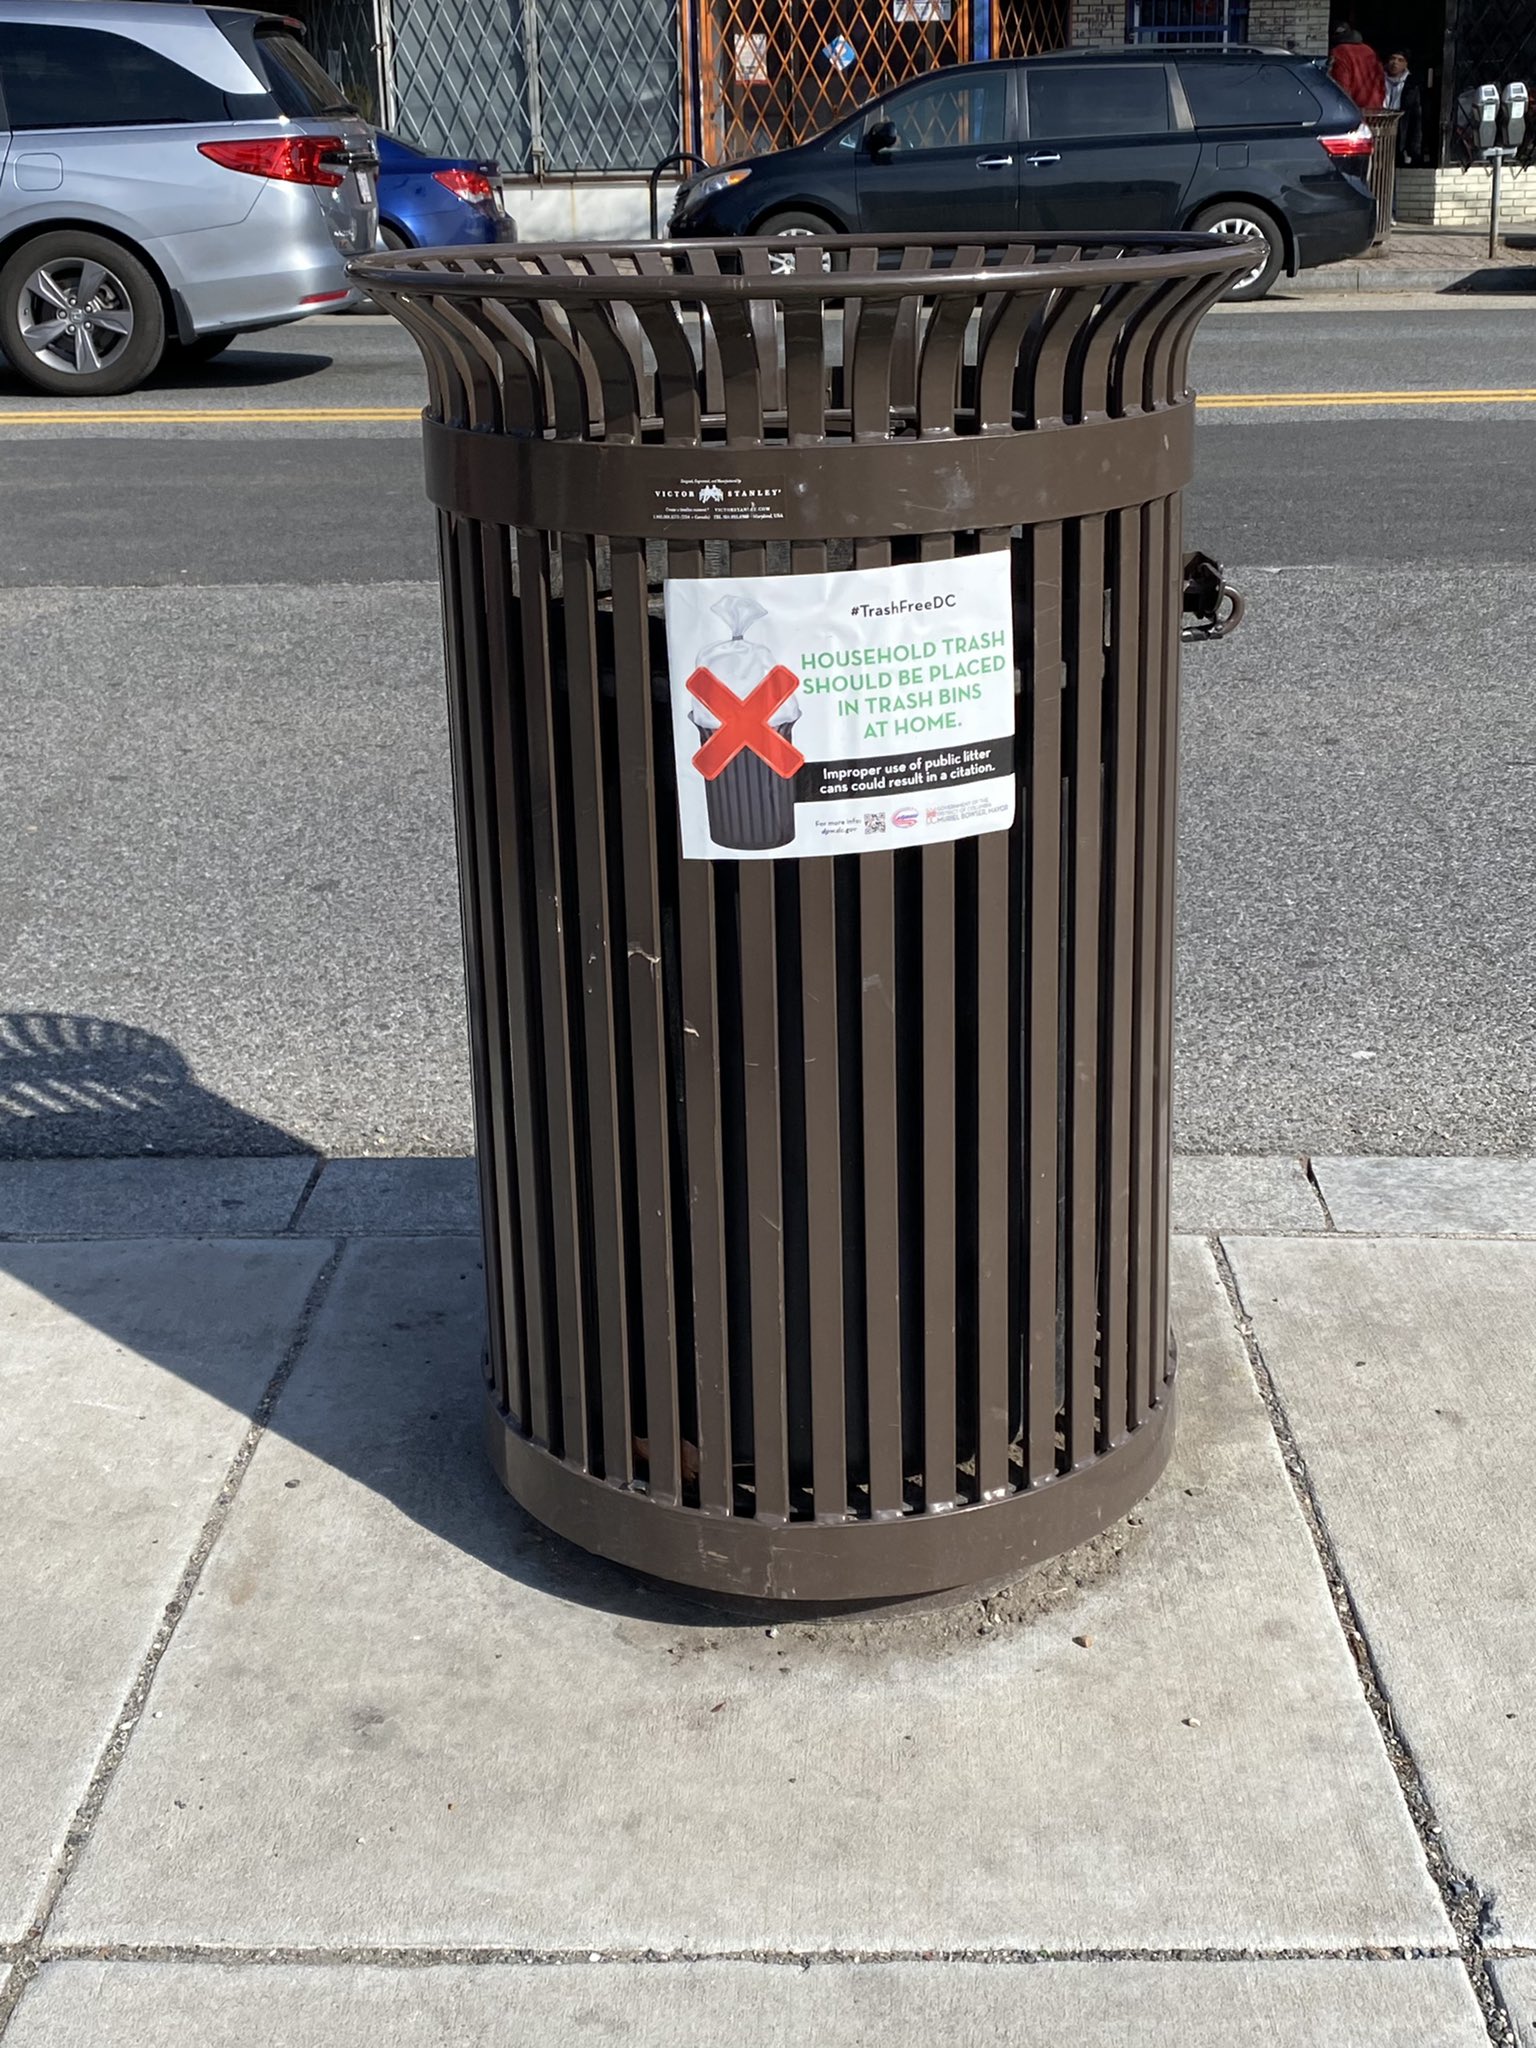 Kent Boese I Ve Started To Notice This Psa Posted On Many Of Our Local Public Litter Cans I Consistently See A Lot Of Household Trash Placed In The Cans Curious